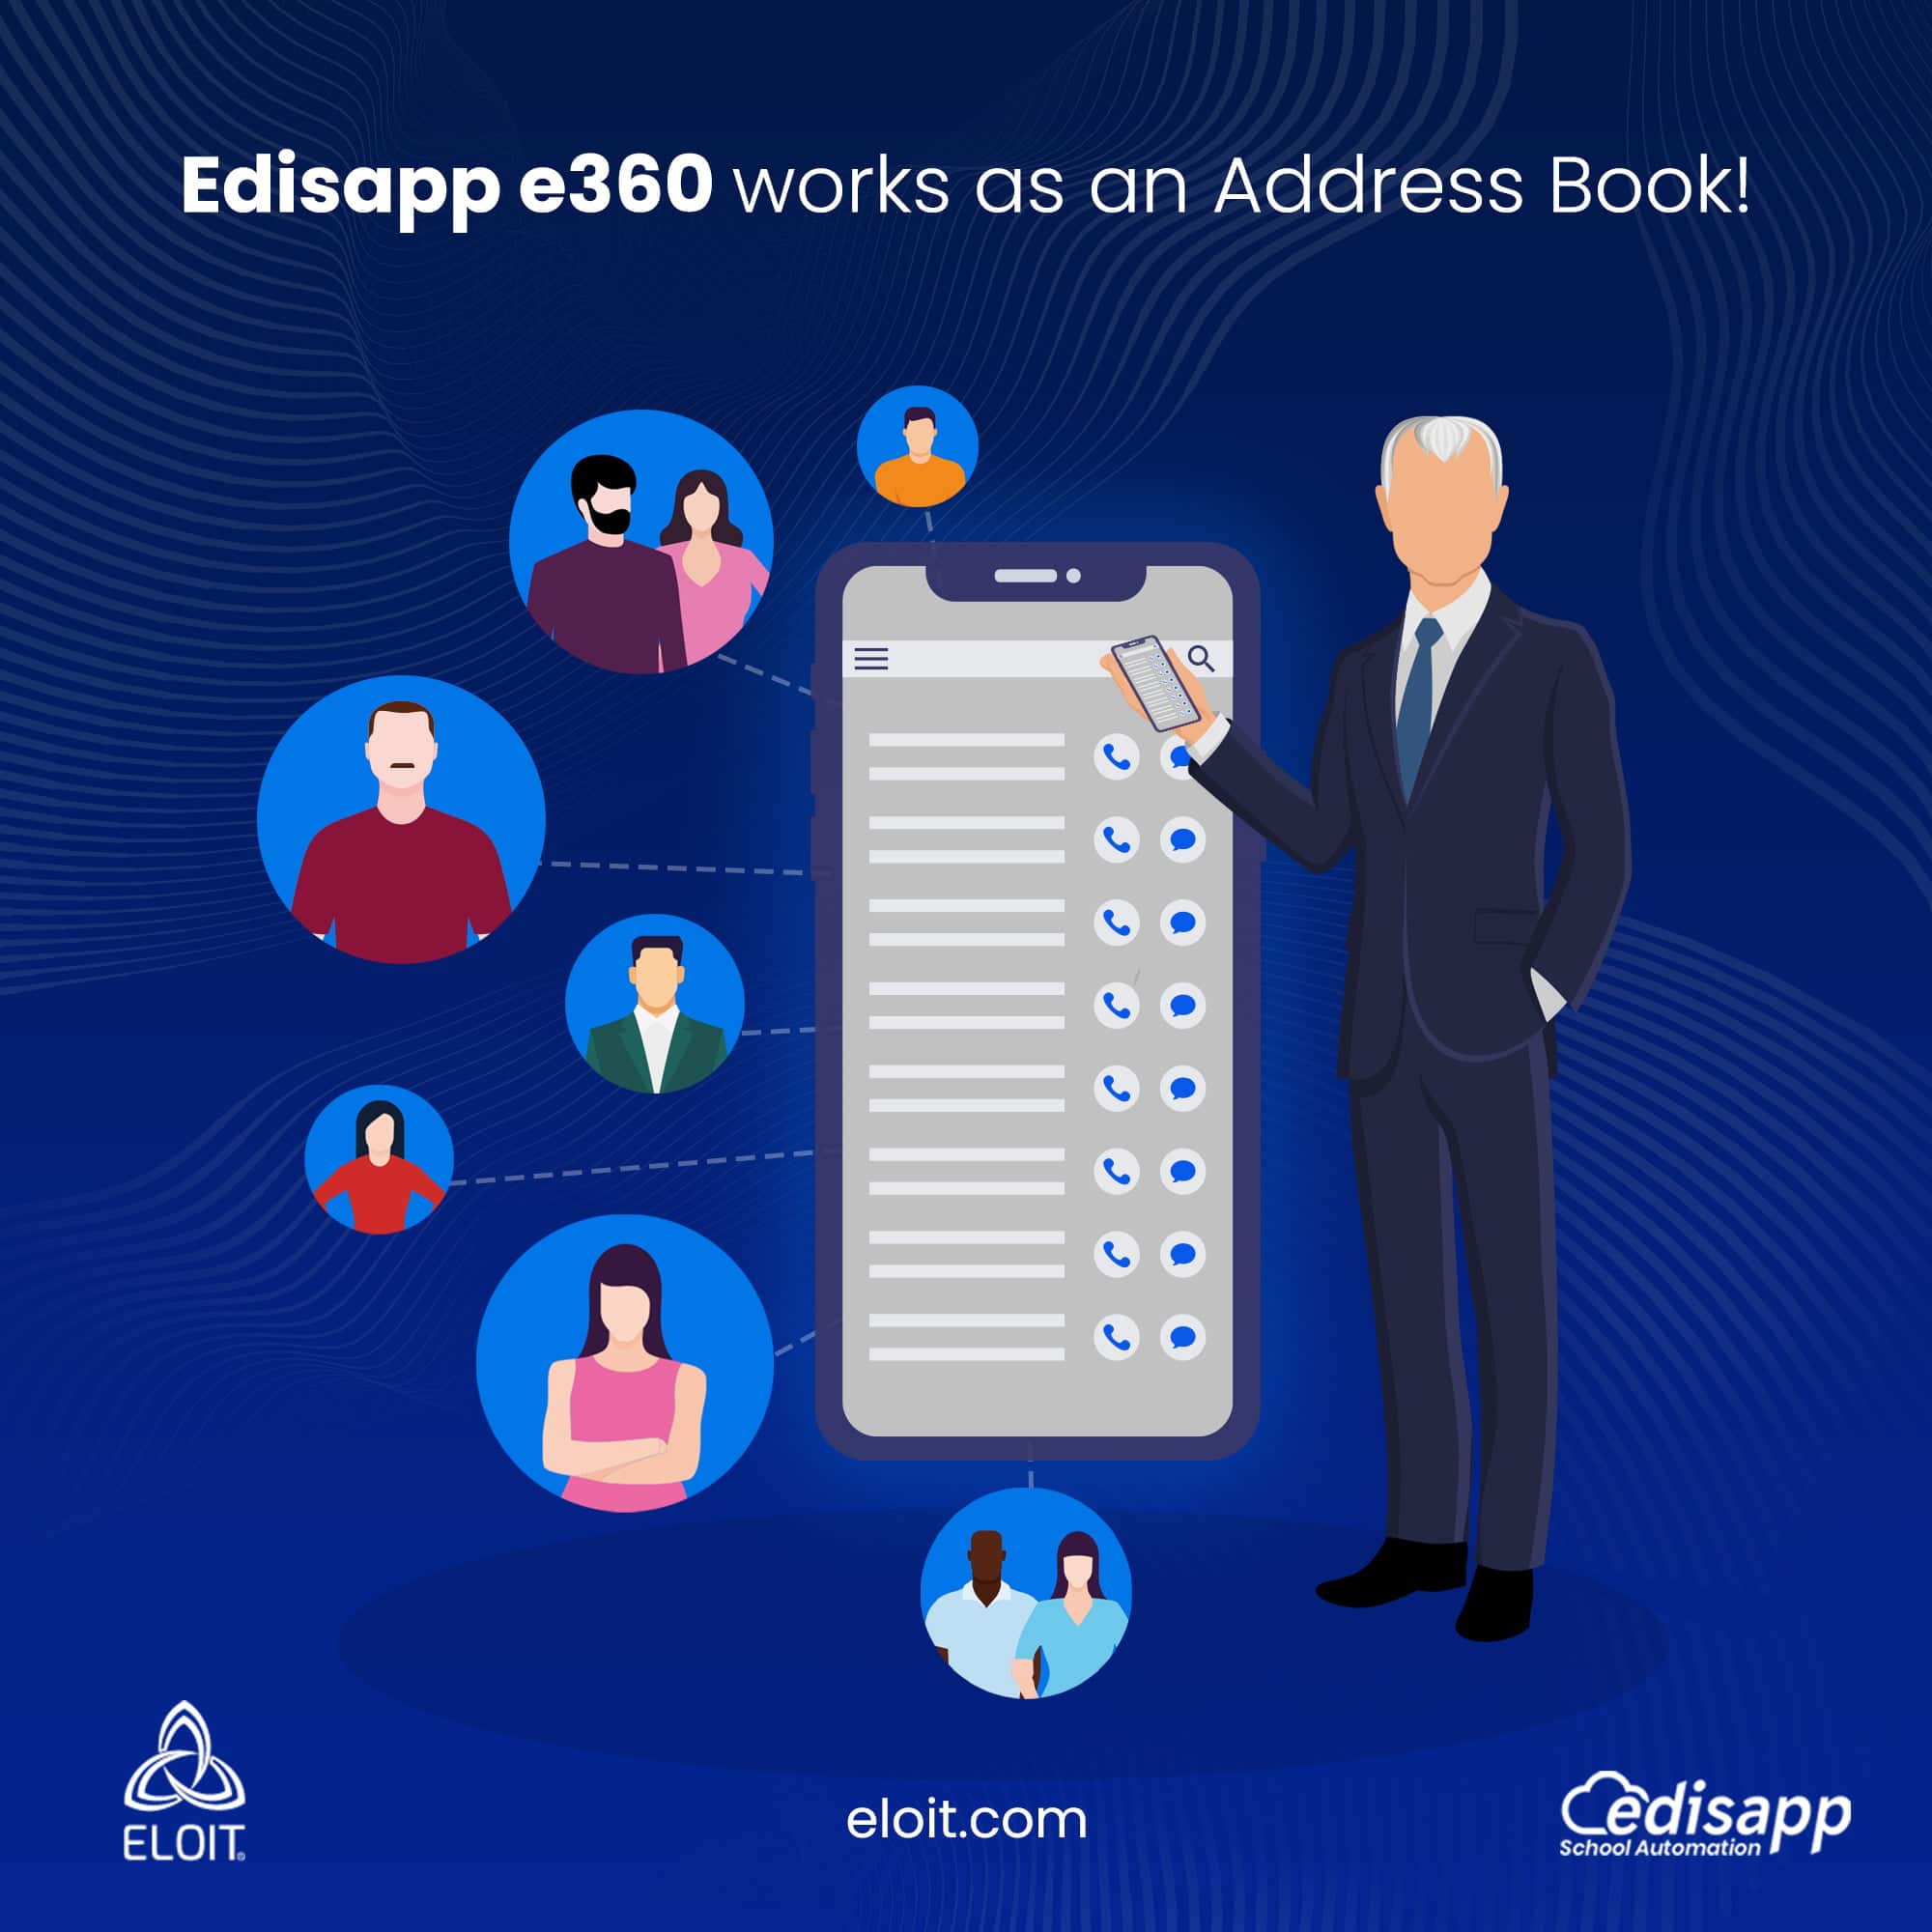 Edisapp-e360 works as a school address book with easy access to student and staff contact details